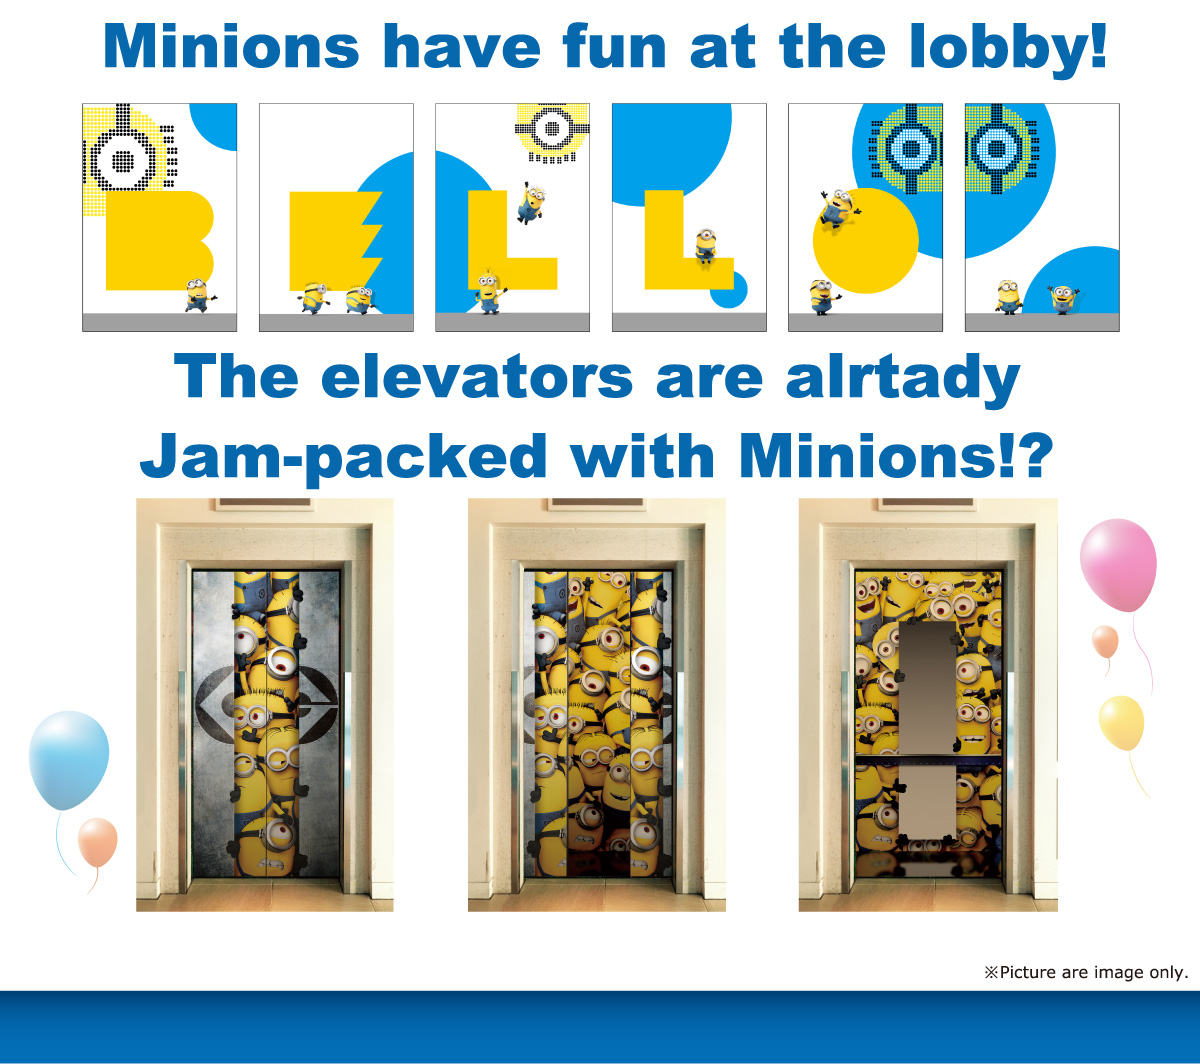 Minions have fun at the lobby!